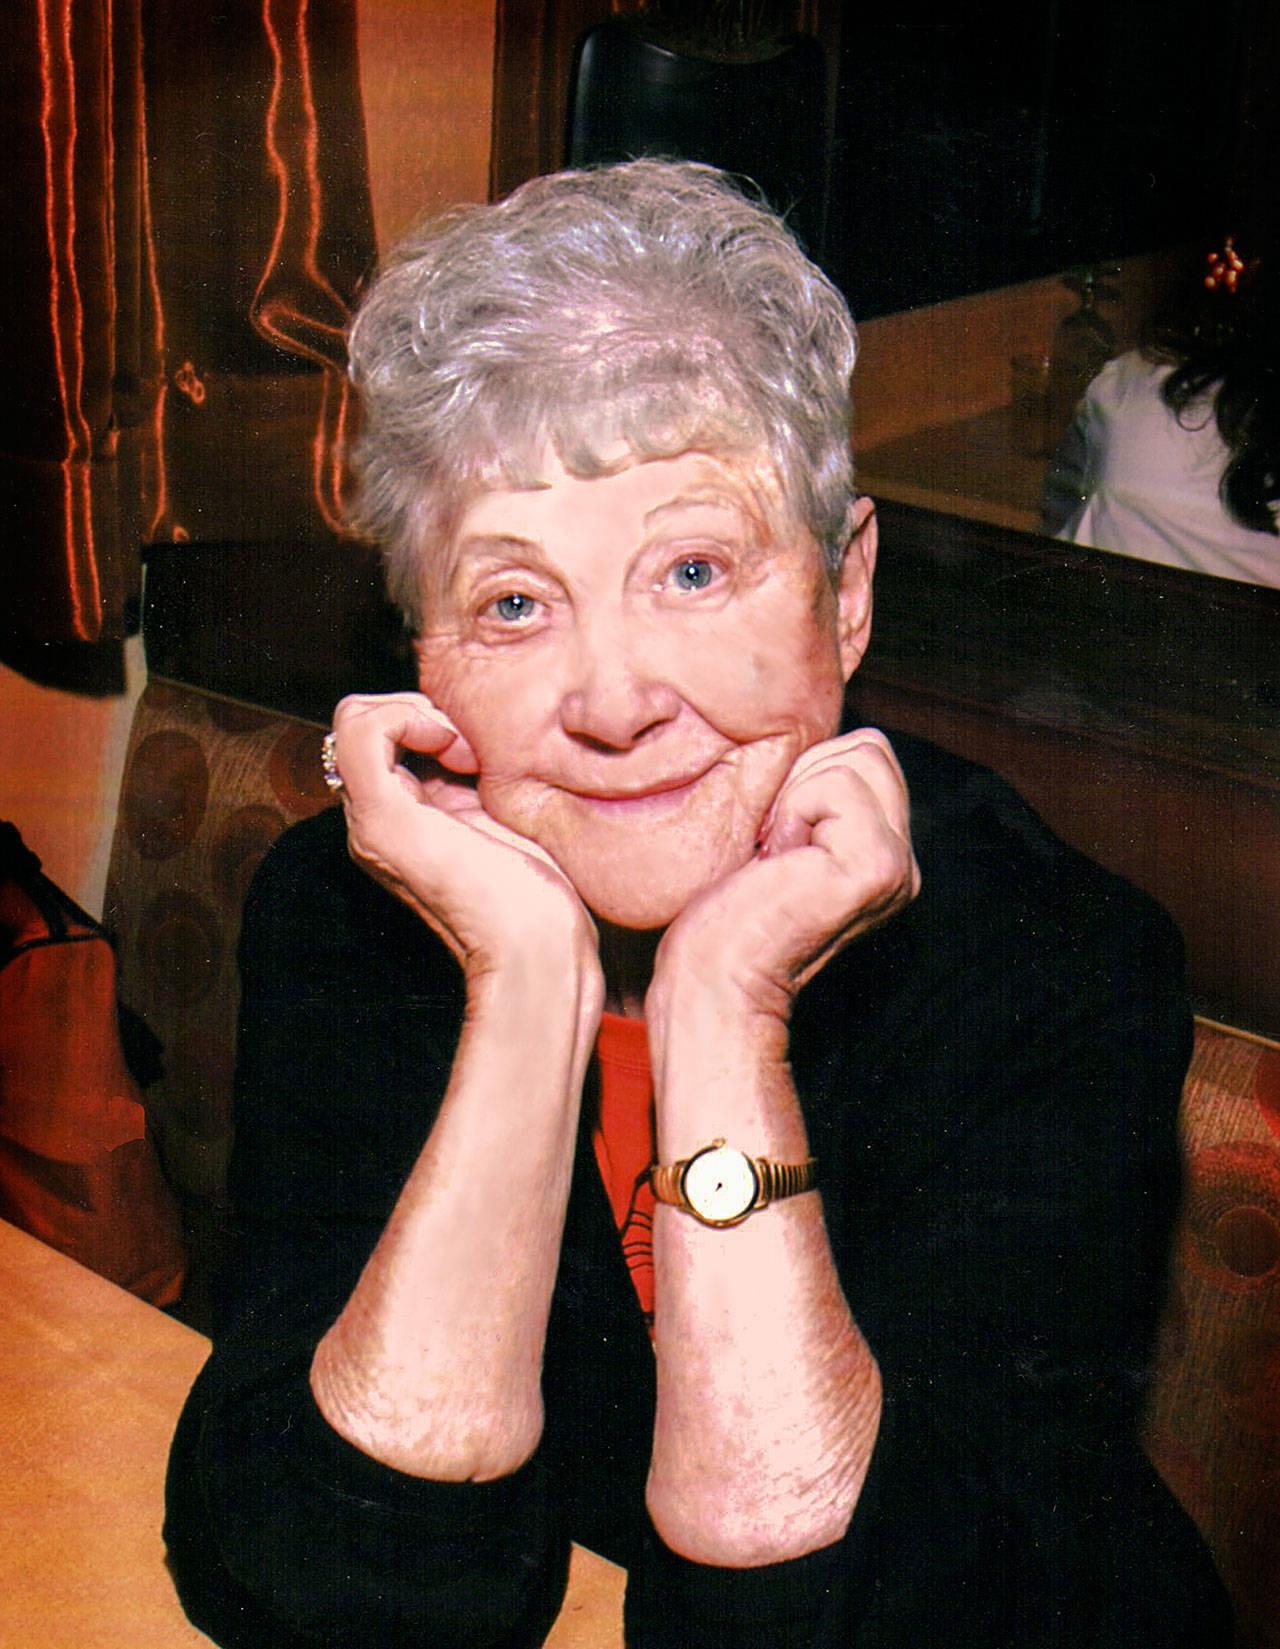 Elizabeth Ruth Wallace, who was raised in Snohomish County but lived in California, died Dec. 4. The Elizabeth Ruth Wallace Living Trust, established in her memory, is the donor behind a pledge of $3 million to the Everett Museum of History. The museum had hoped to acquire Everett’s old Longfellow School building.